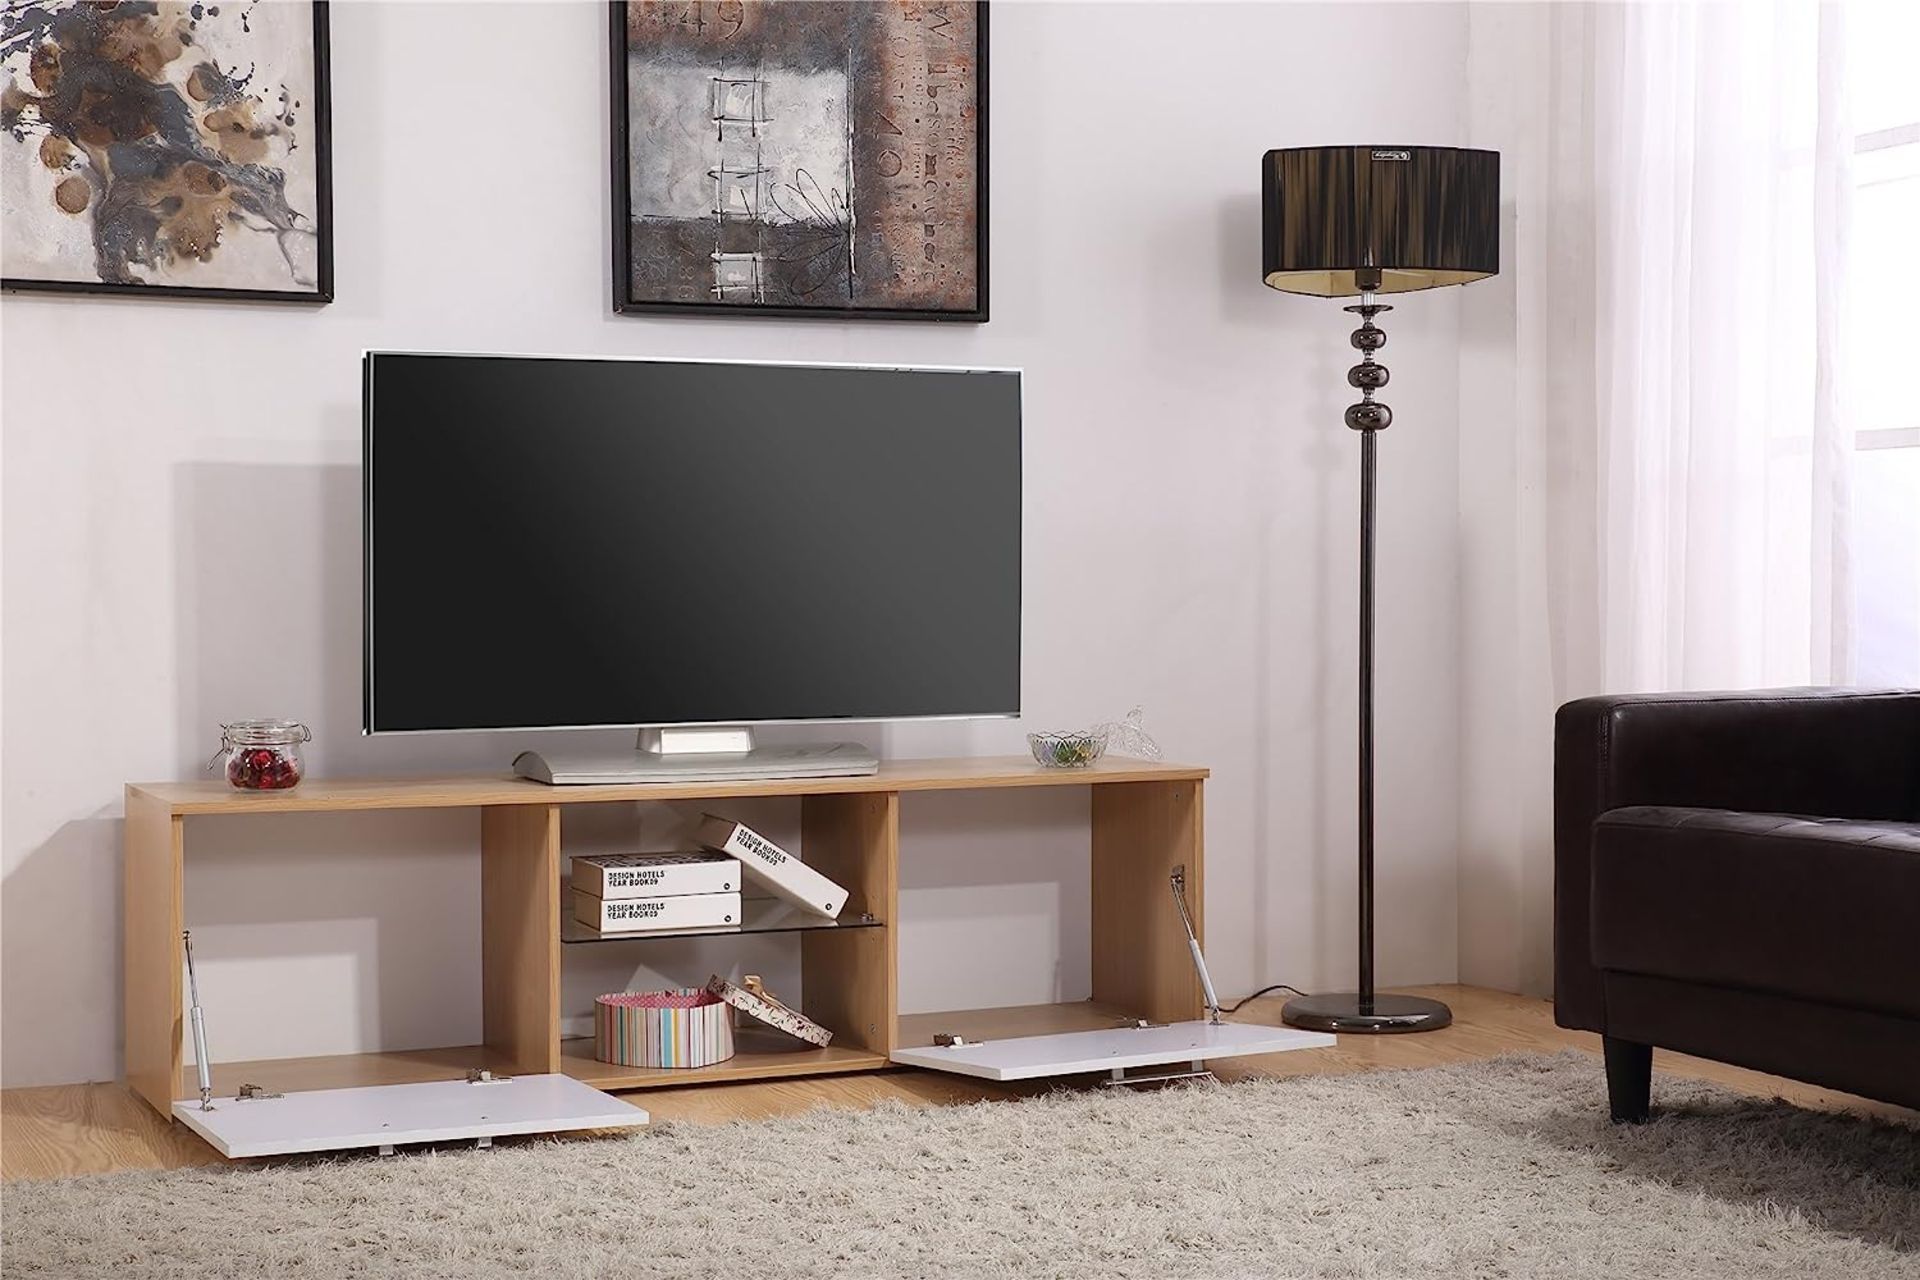 5 X BRAND NEW HARMIN MODERN 160CM TV STAND CABINET UNIT WITH HIGH GLOSS DOORS (WHITE ON OAK) - Image 3 of 9